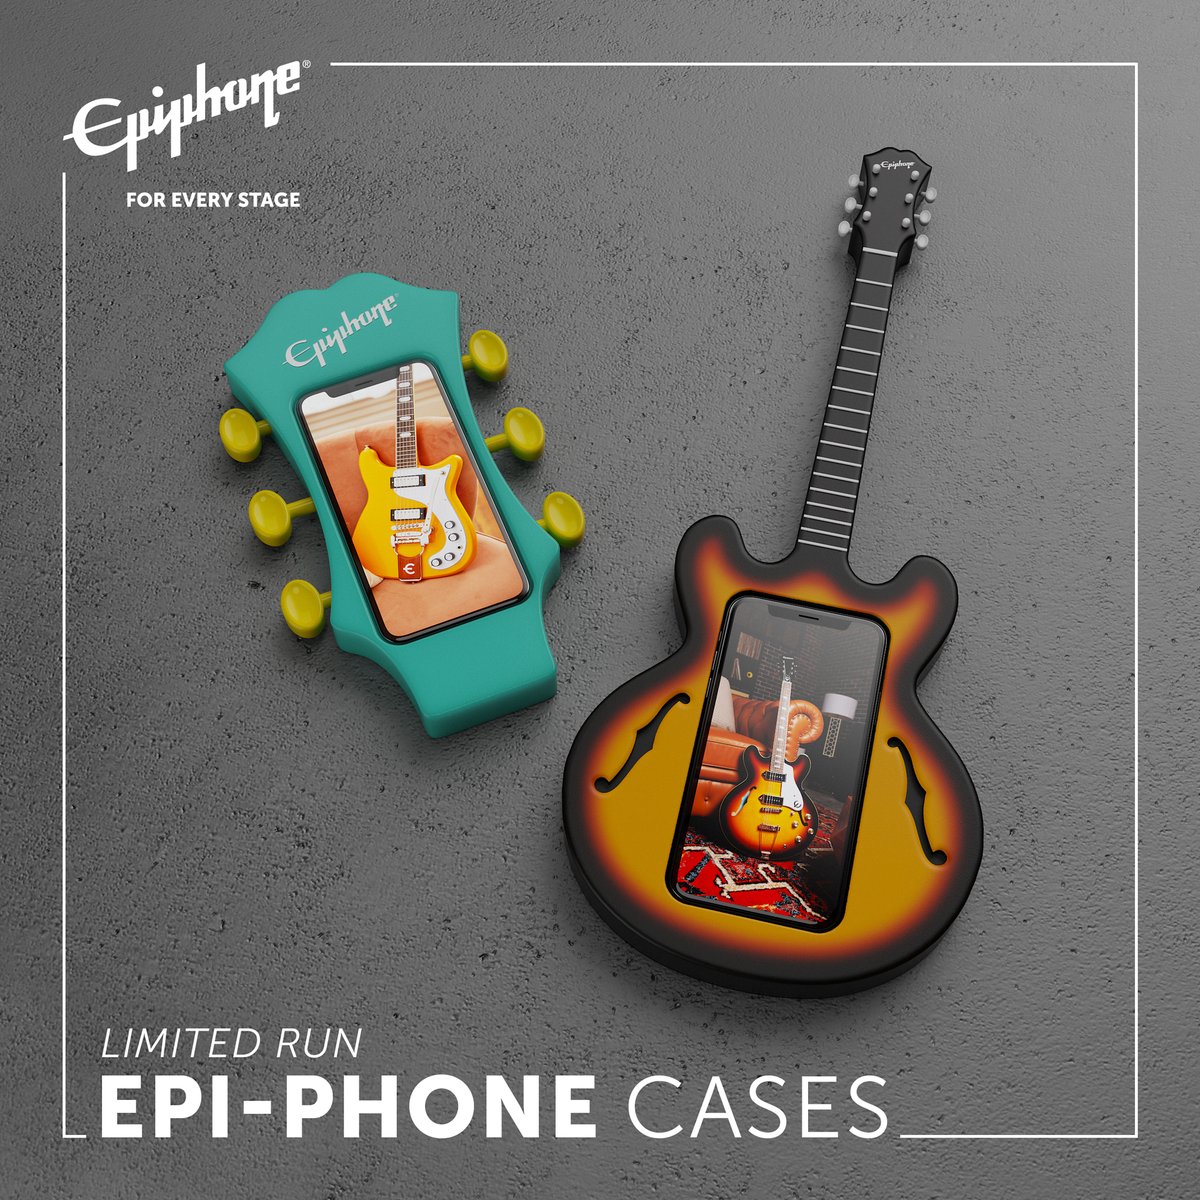 Calling all Epi-Fans! Limited-Edition Epi-Phone Cases available now! #epiphone #foreveryphone #aprilfools